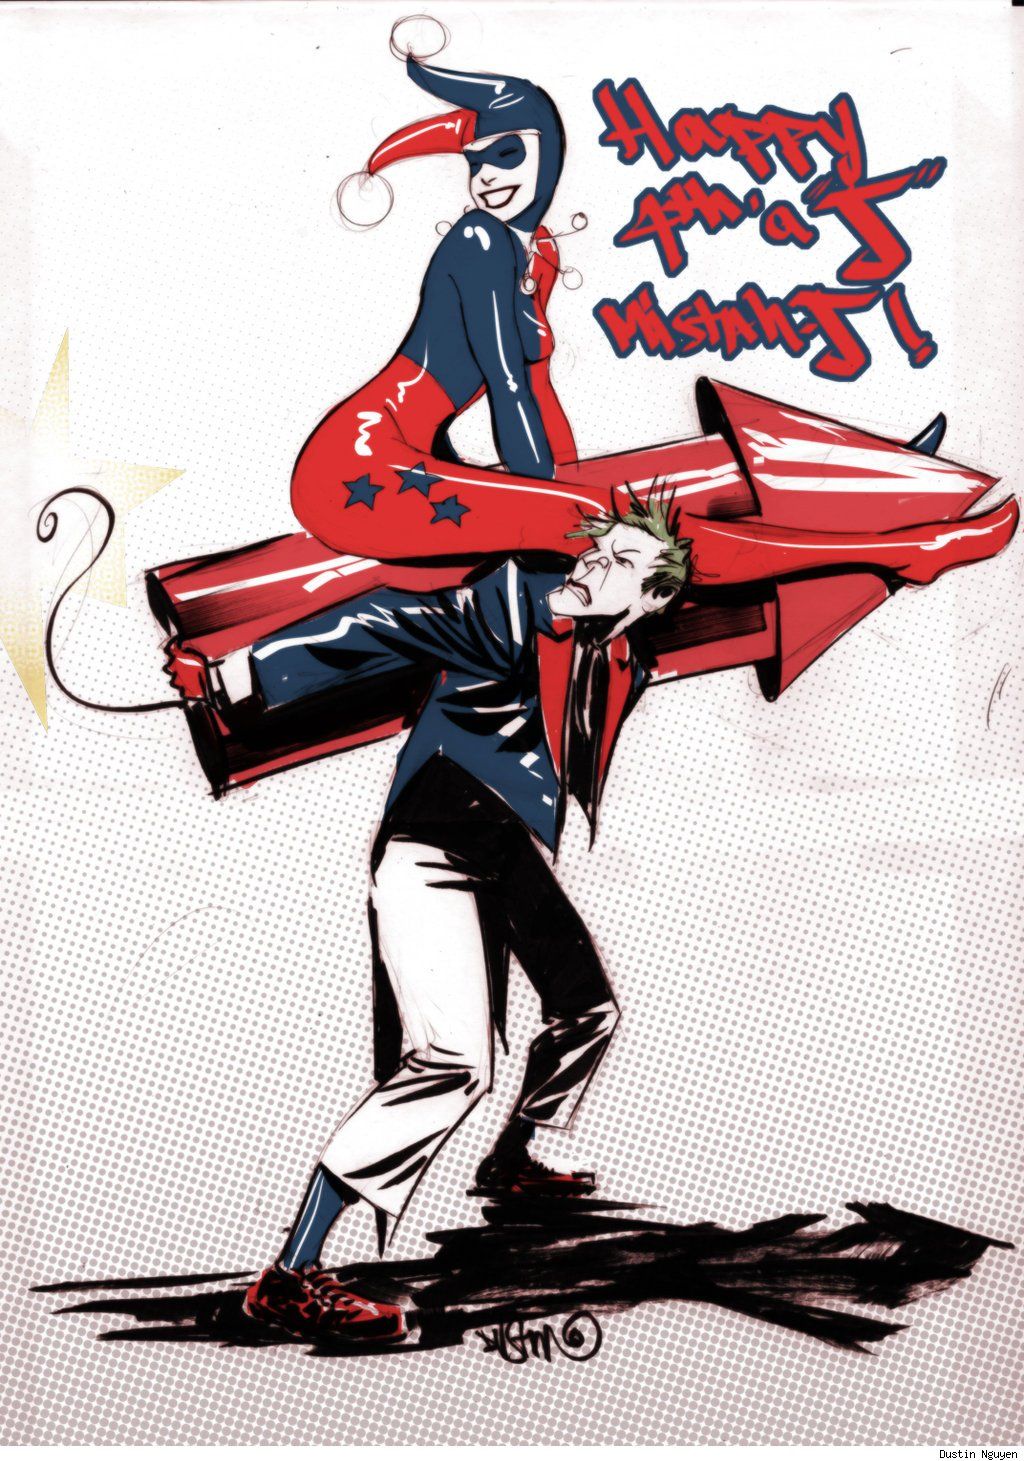 Happy Independence Day from The Joker, Harley Quinn and Dustin Nguyen